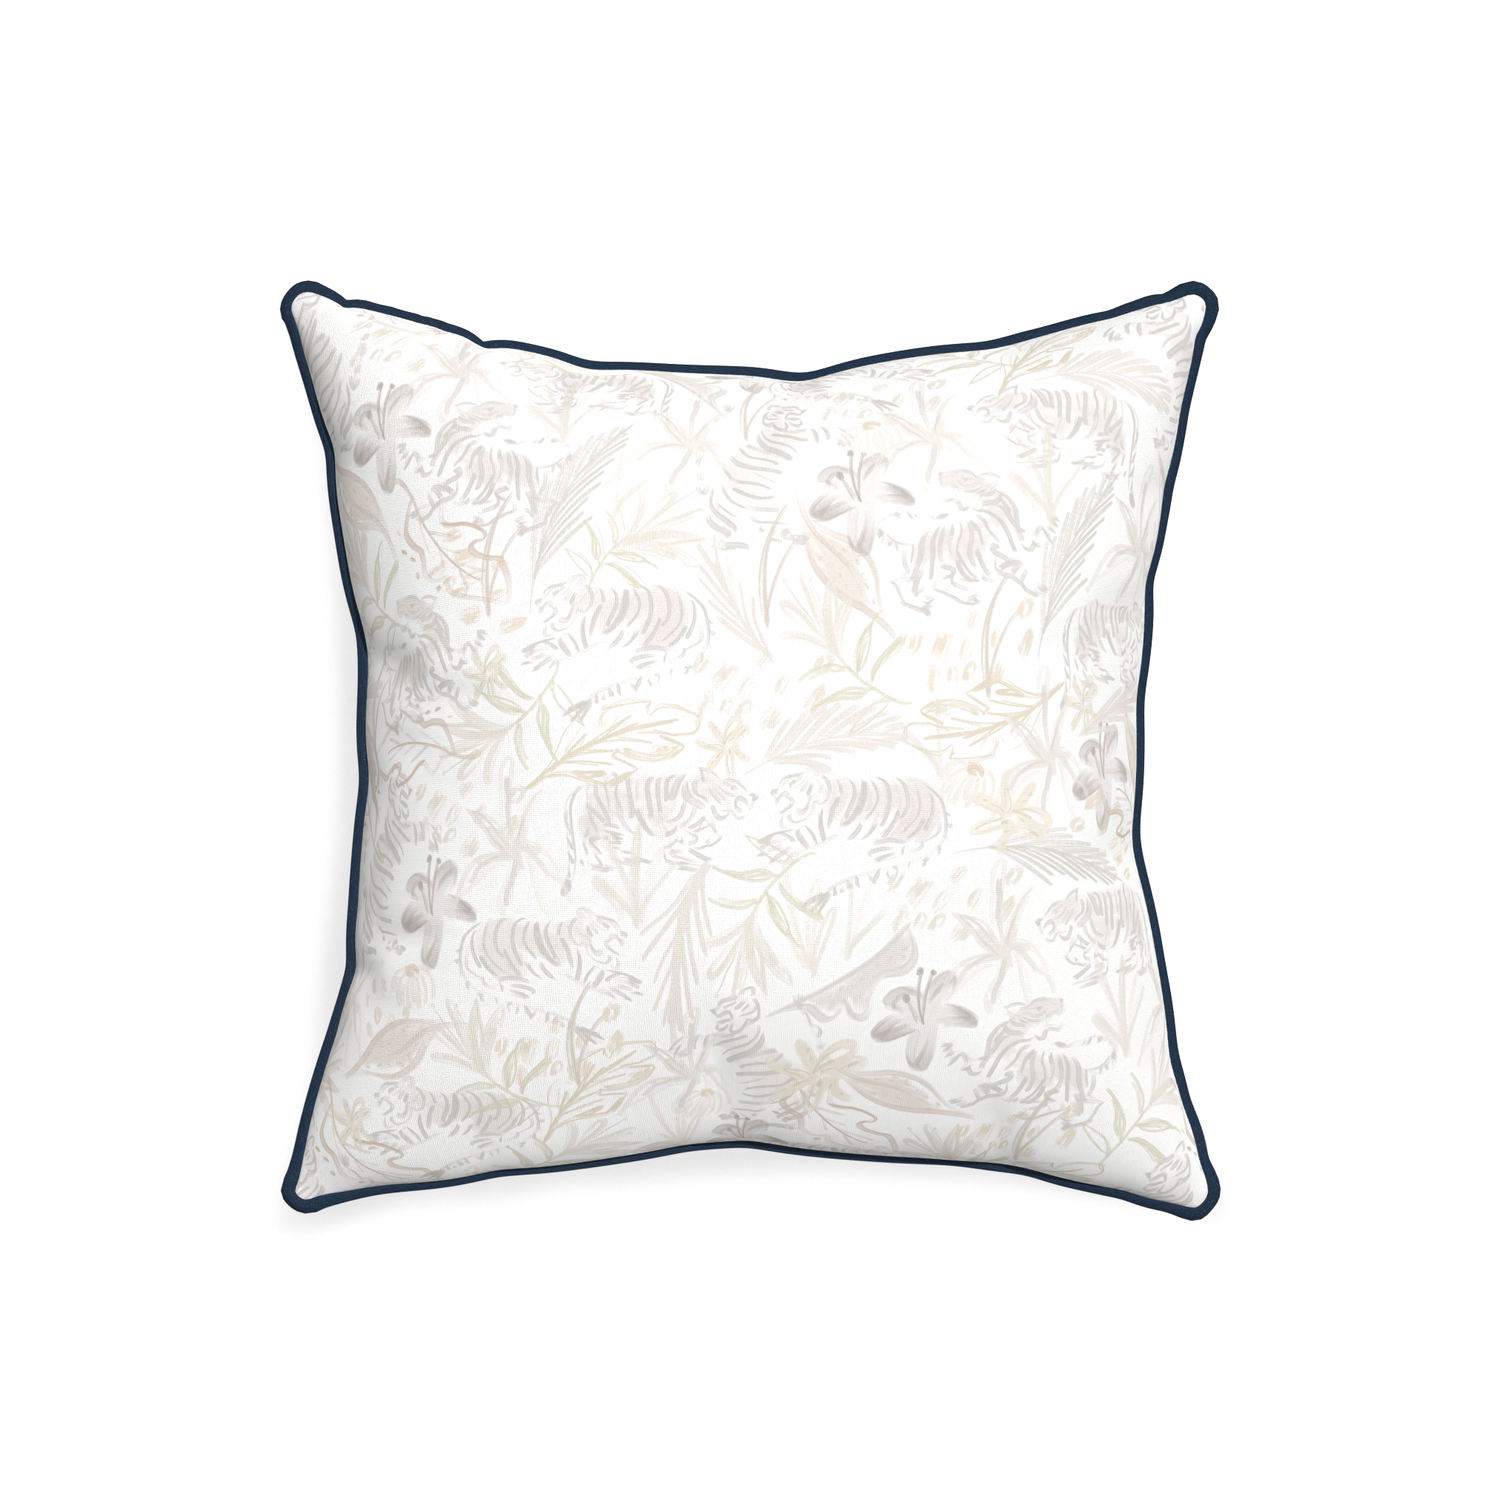 20-square frida sand custom beige chinoiserie tigerpillow with c piping on white background